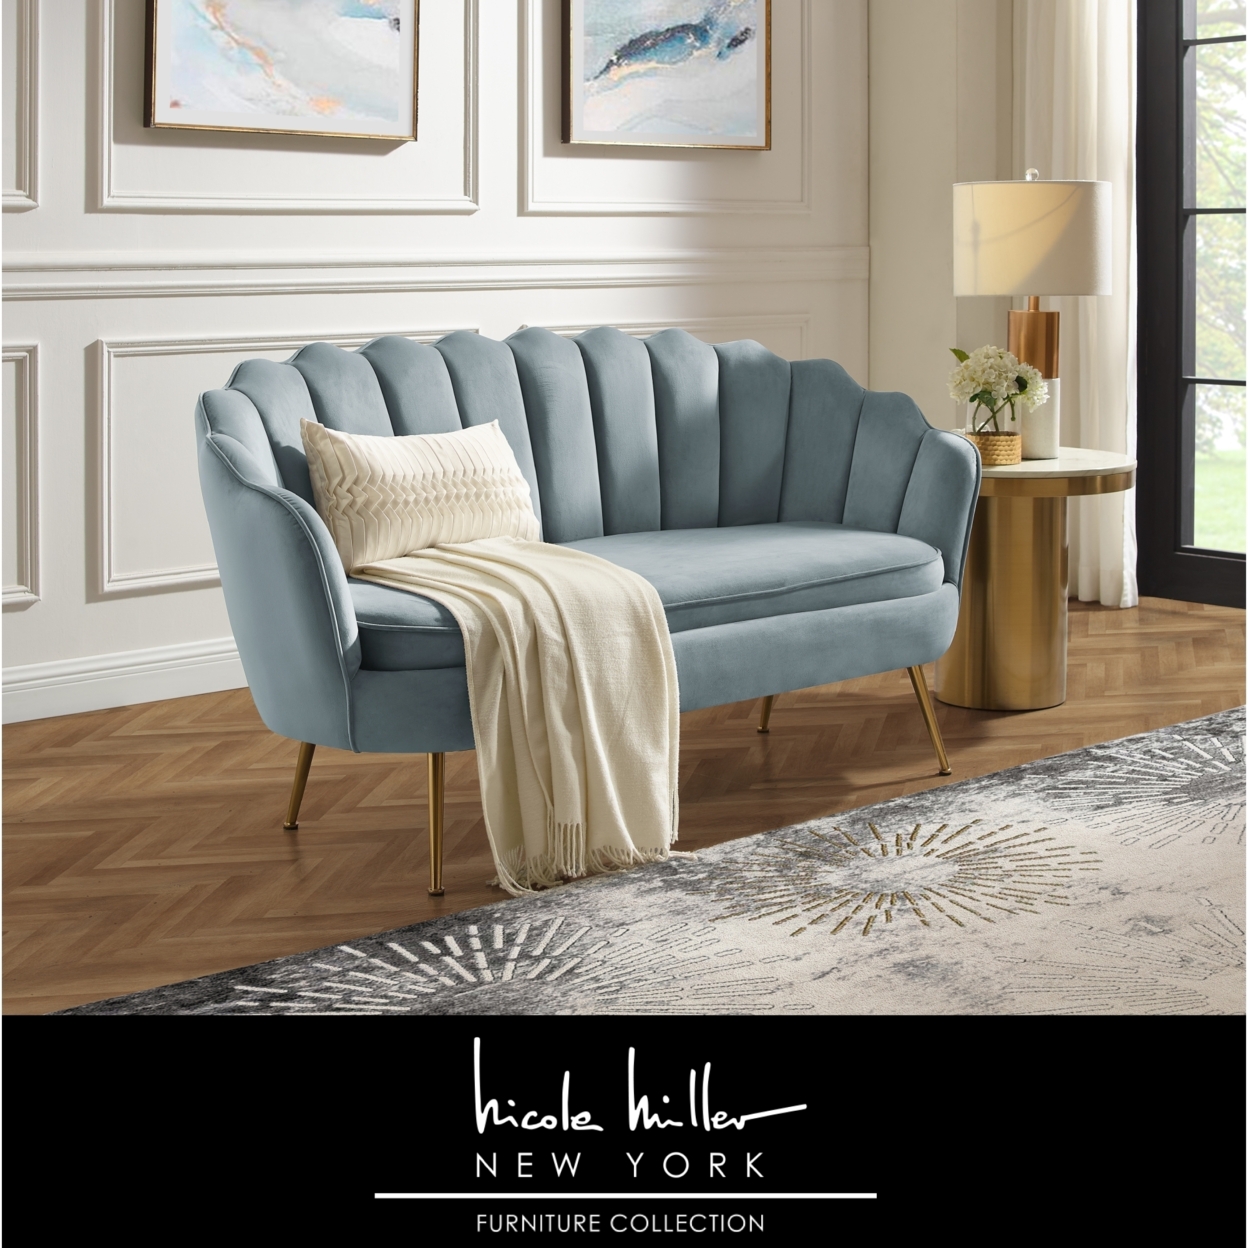 Dallin Loveseat - Upholstered Channel Tufted, Scalloped Edges, Tapered Polished Gold Legs - Light Blue